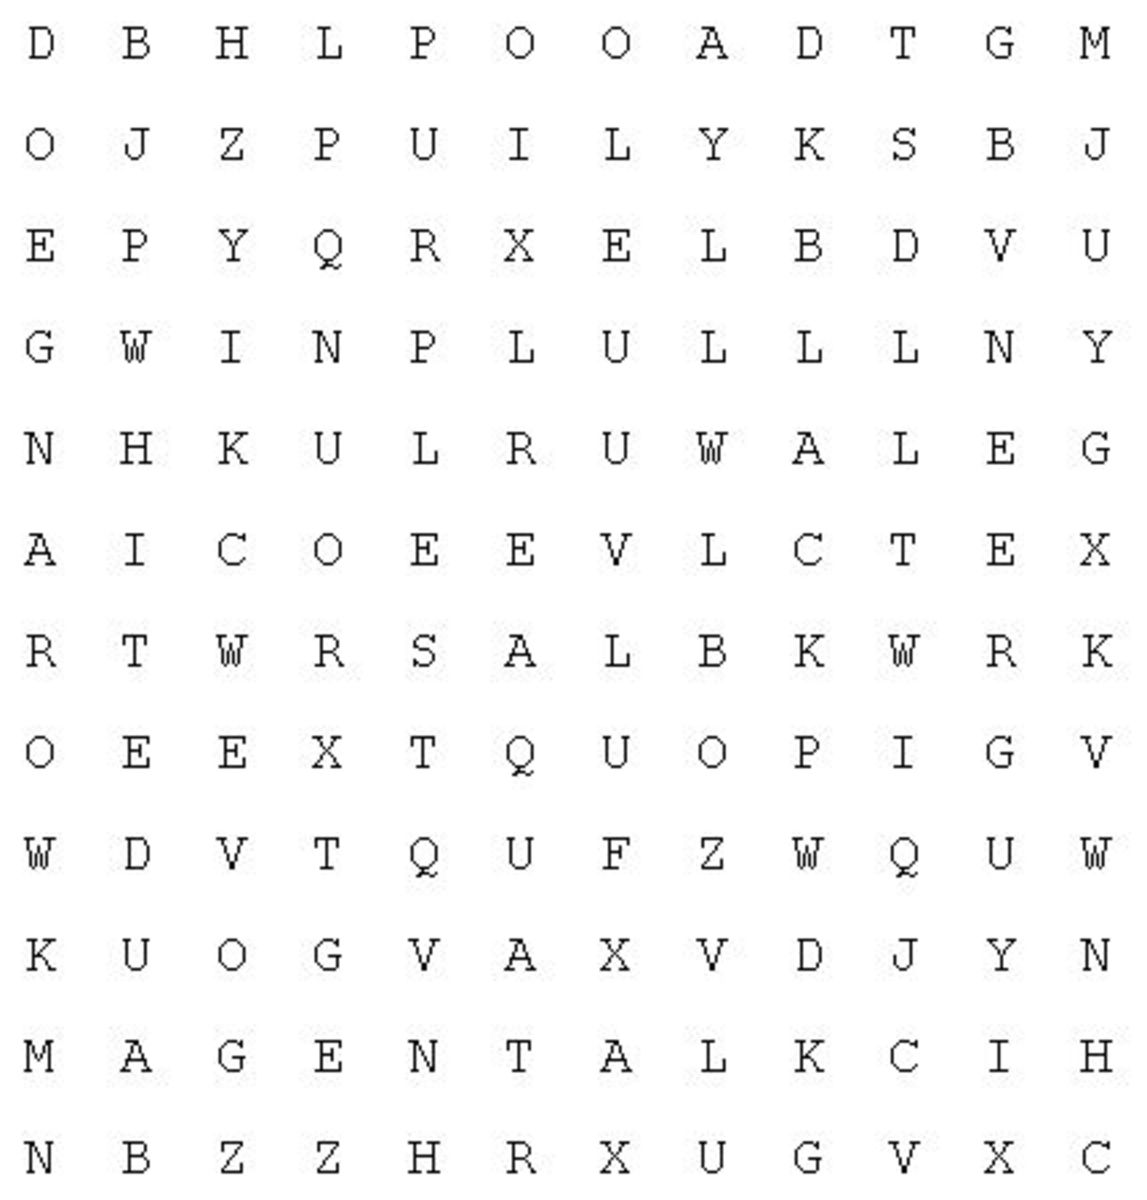 Make your own word search for free with online utilities and free software.